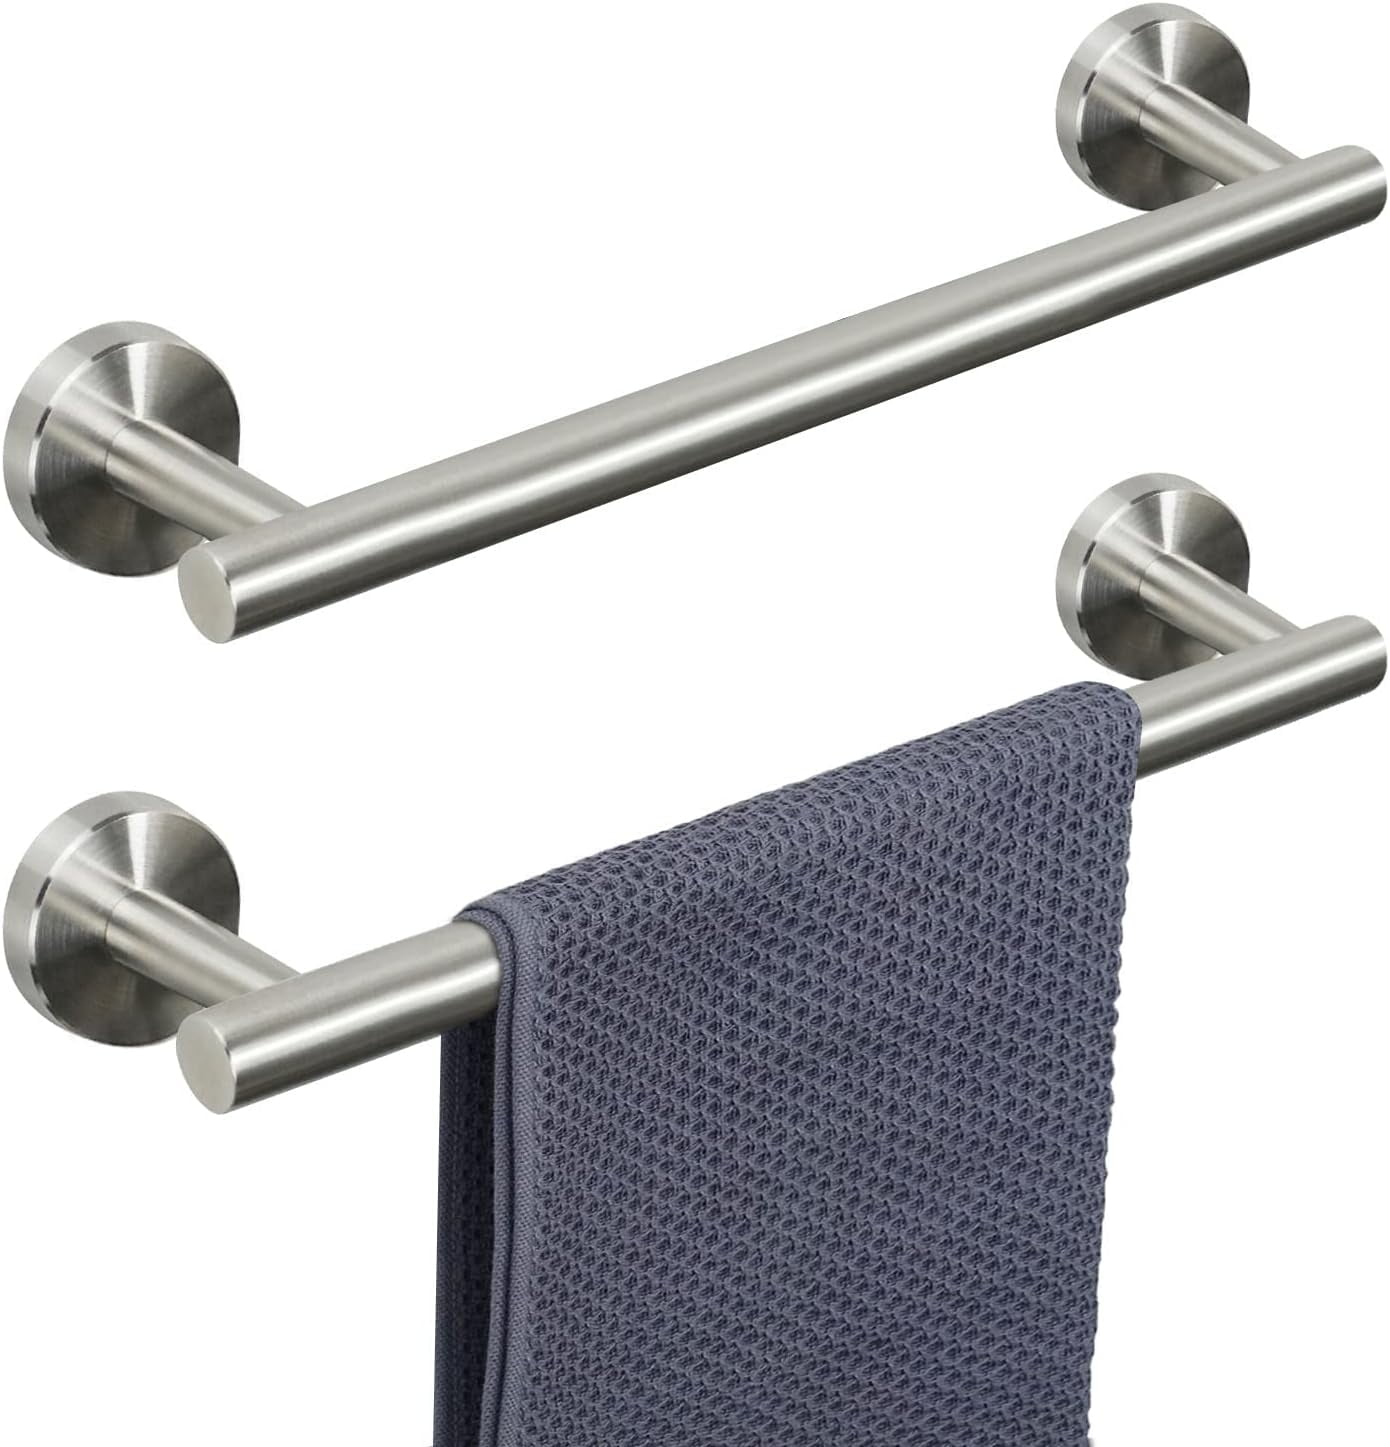 NearMoon Swivel Towel Rack, Thicken SUS304 Stainless Steel 4-Arm Towel Bar,  Space Saving Wall Mounted Towel Holder with Hook, Rustproof Swing Out